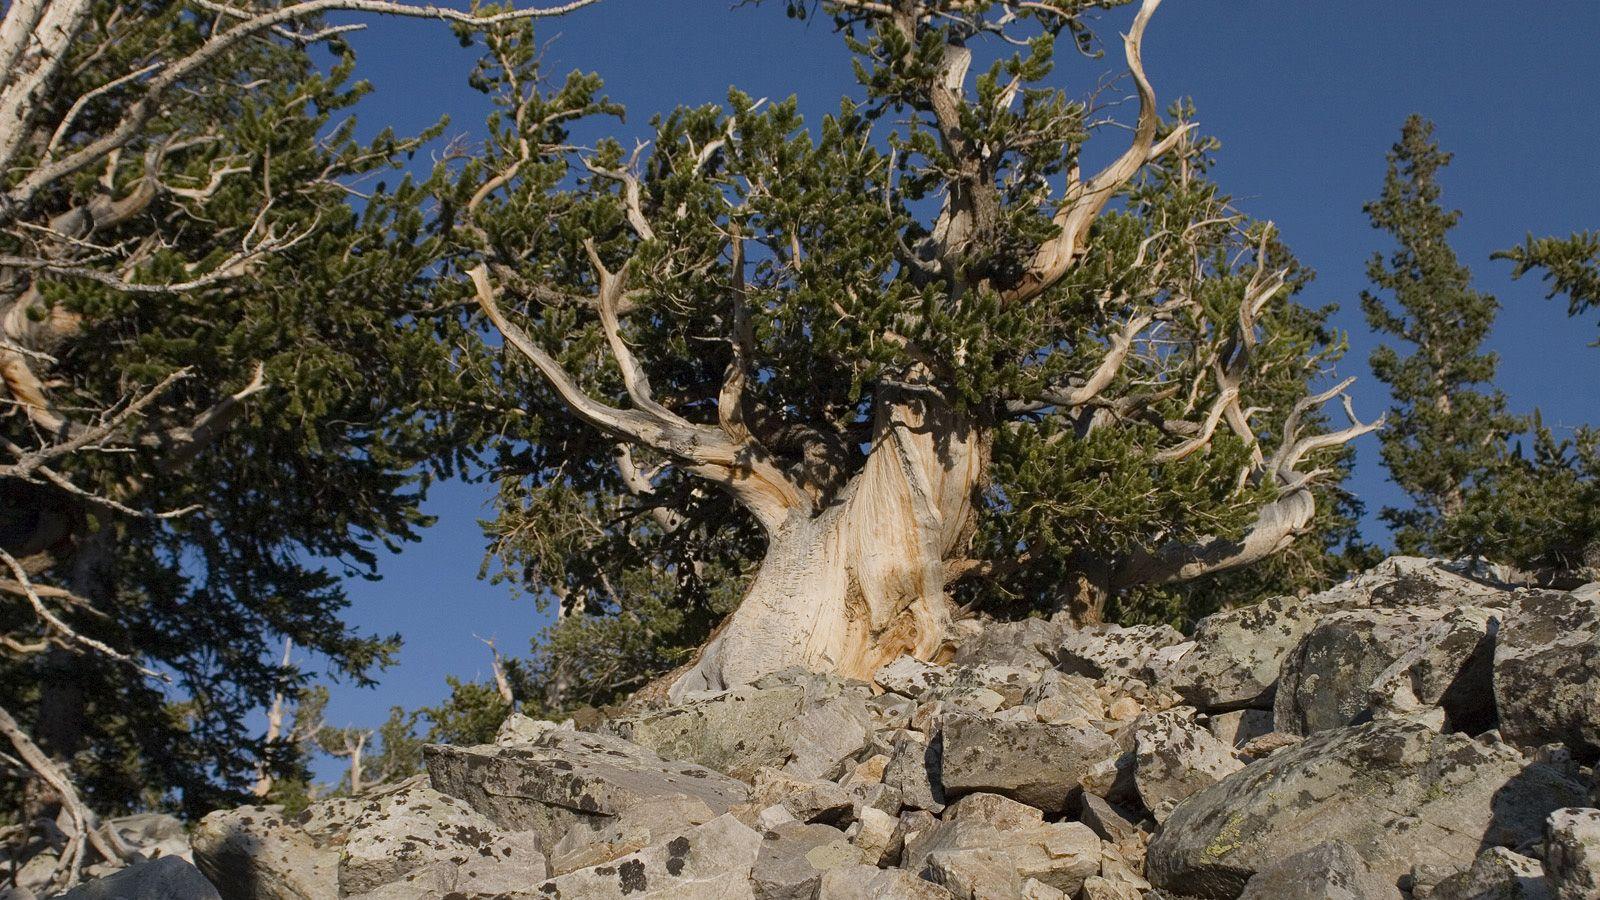 Bristlecone Pines in Great Basin National Park. Photo © Tee Poole